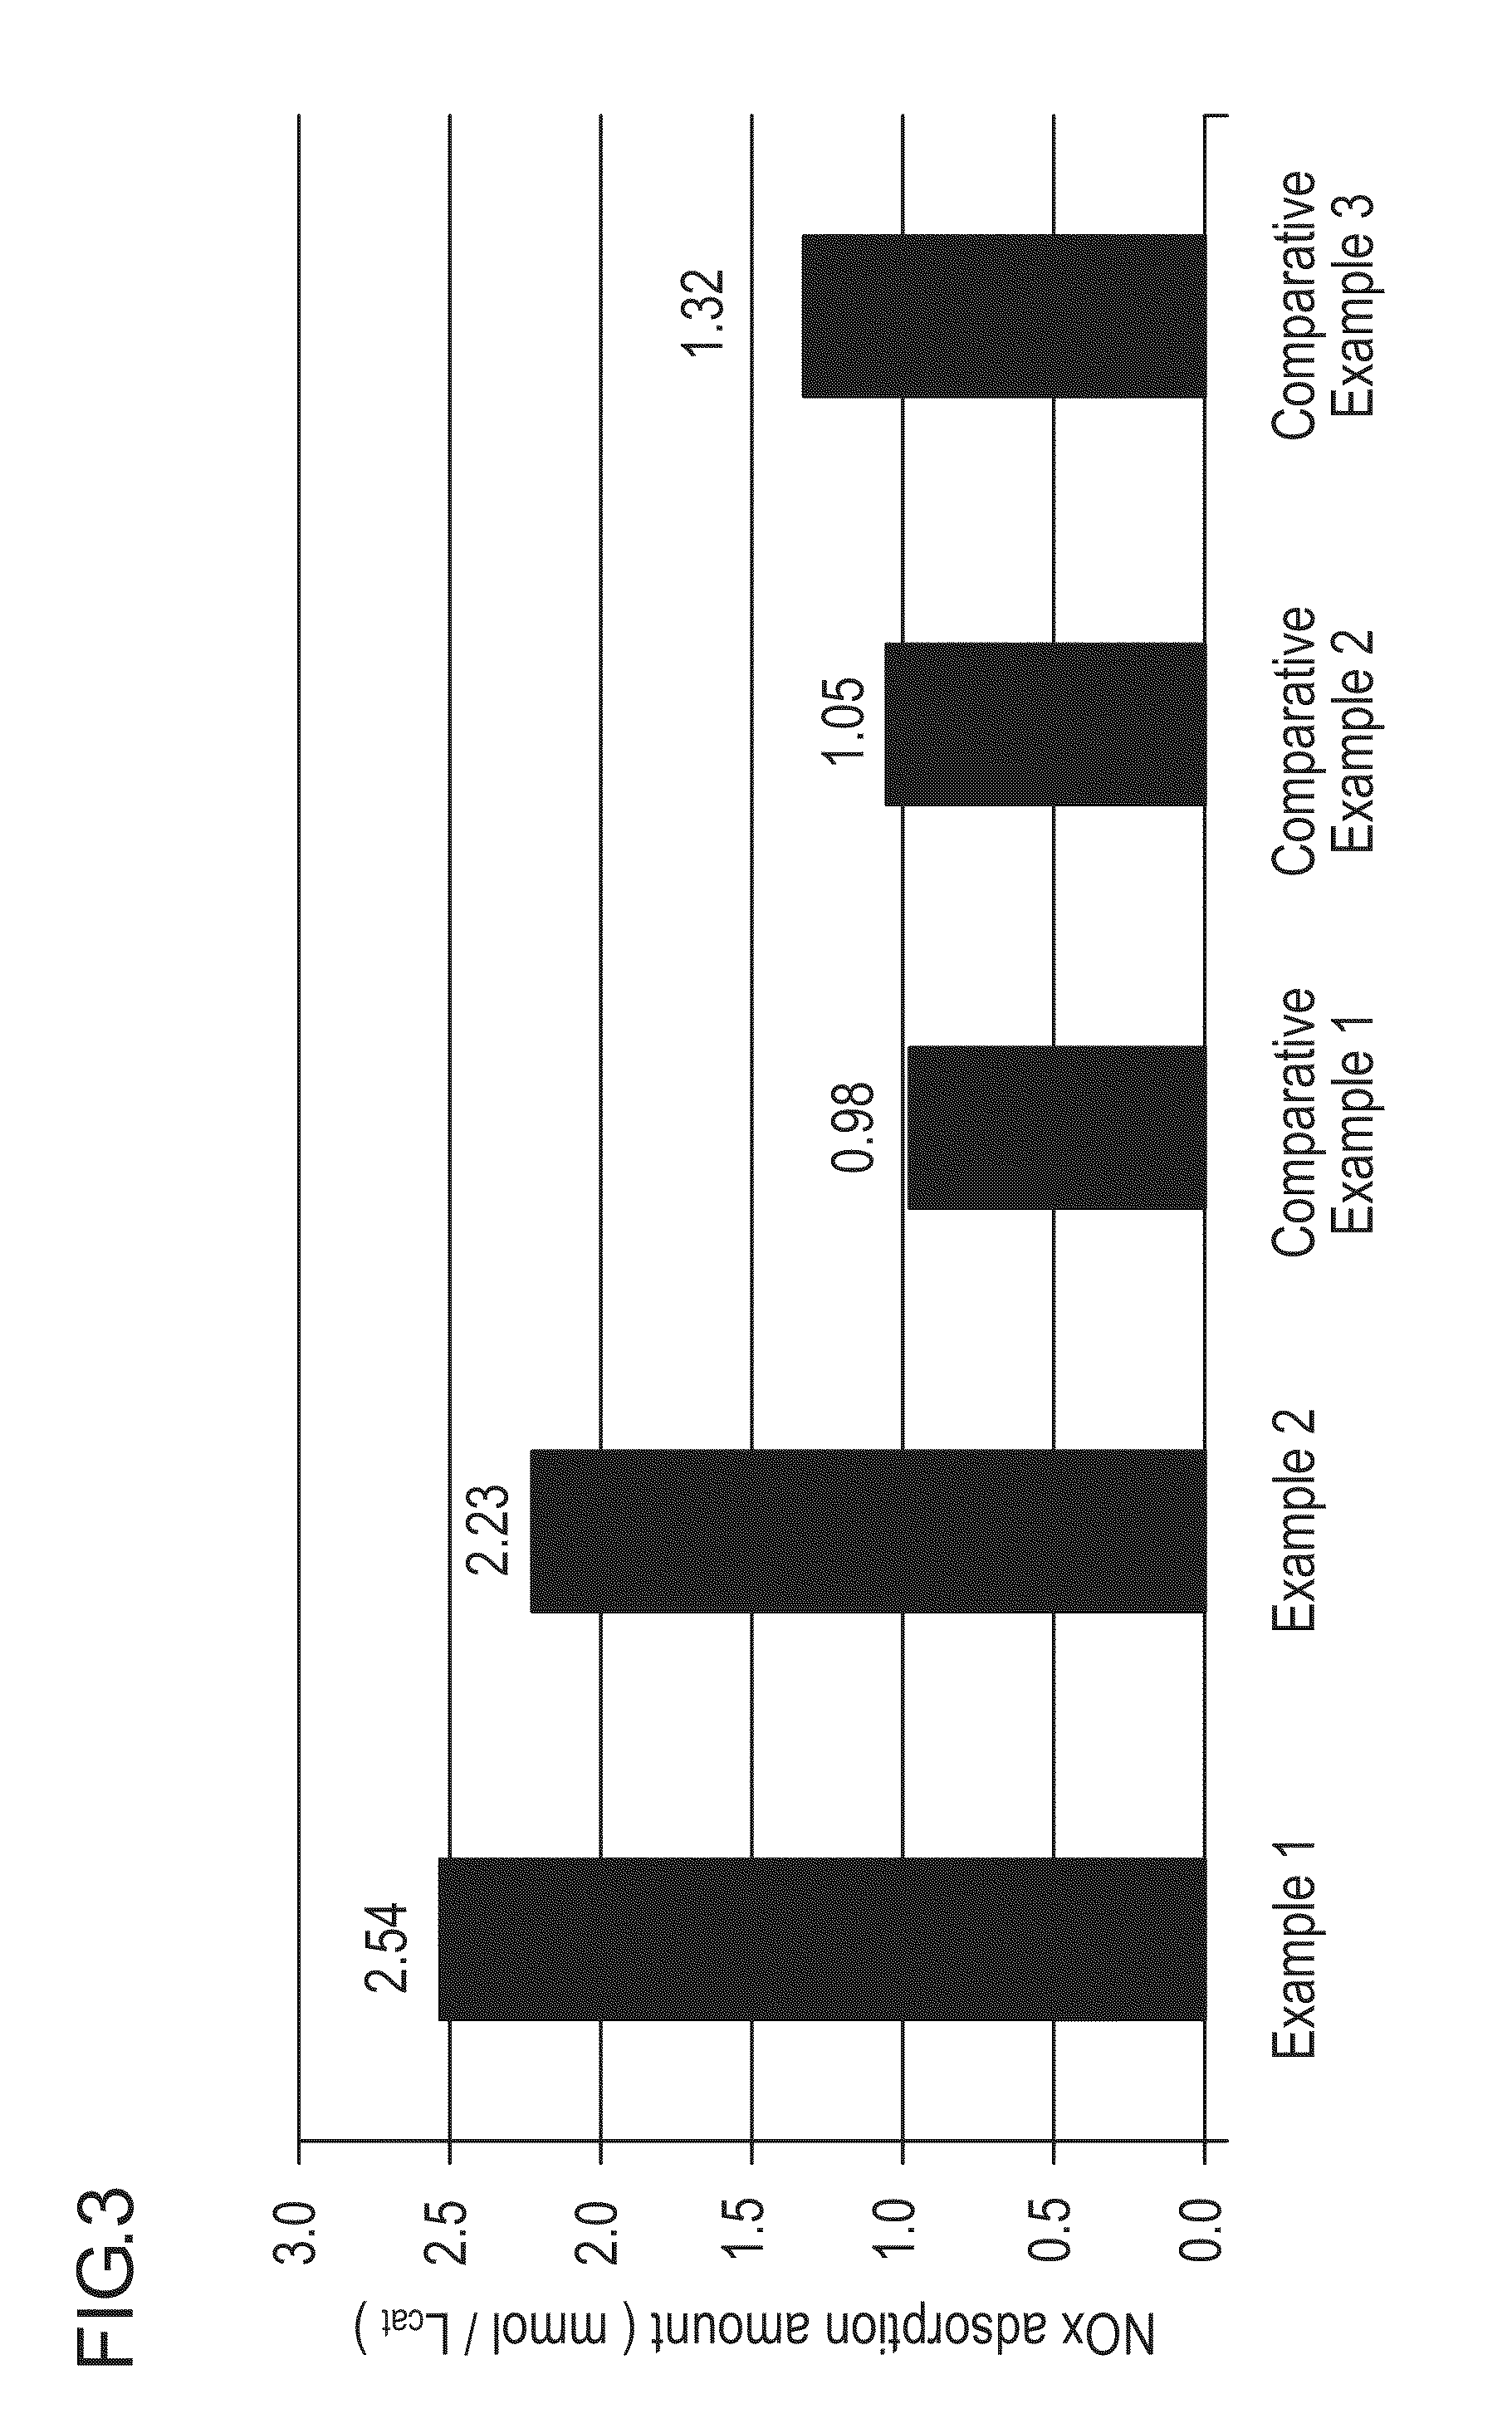 Catalyst for the removal of nitrogen oxides and method for the removal of nitrogen oxides with the same